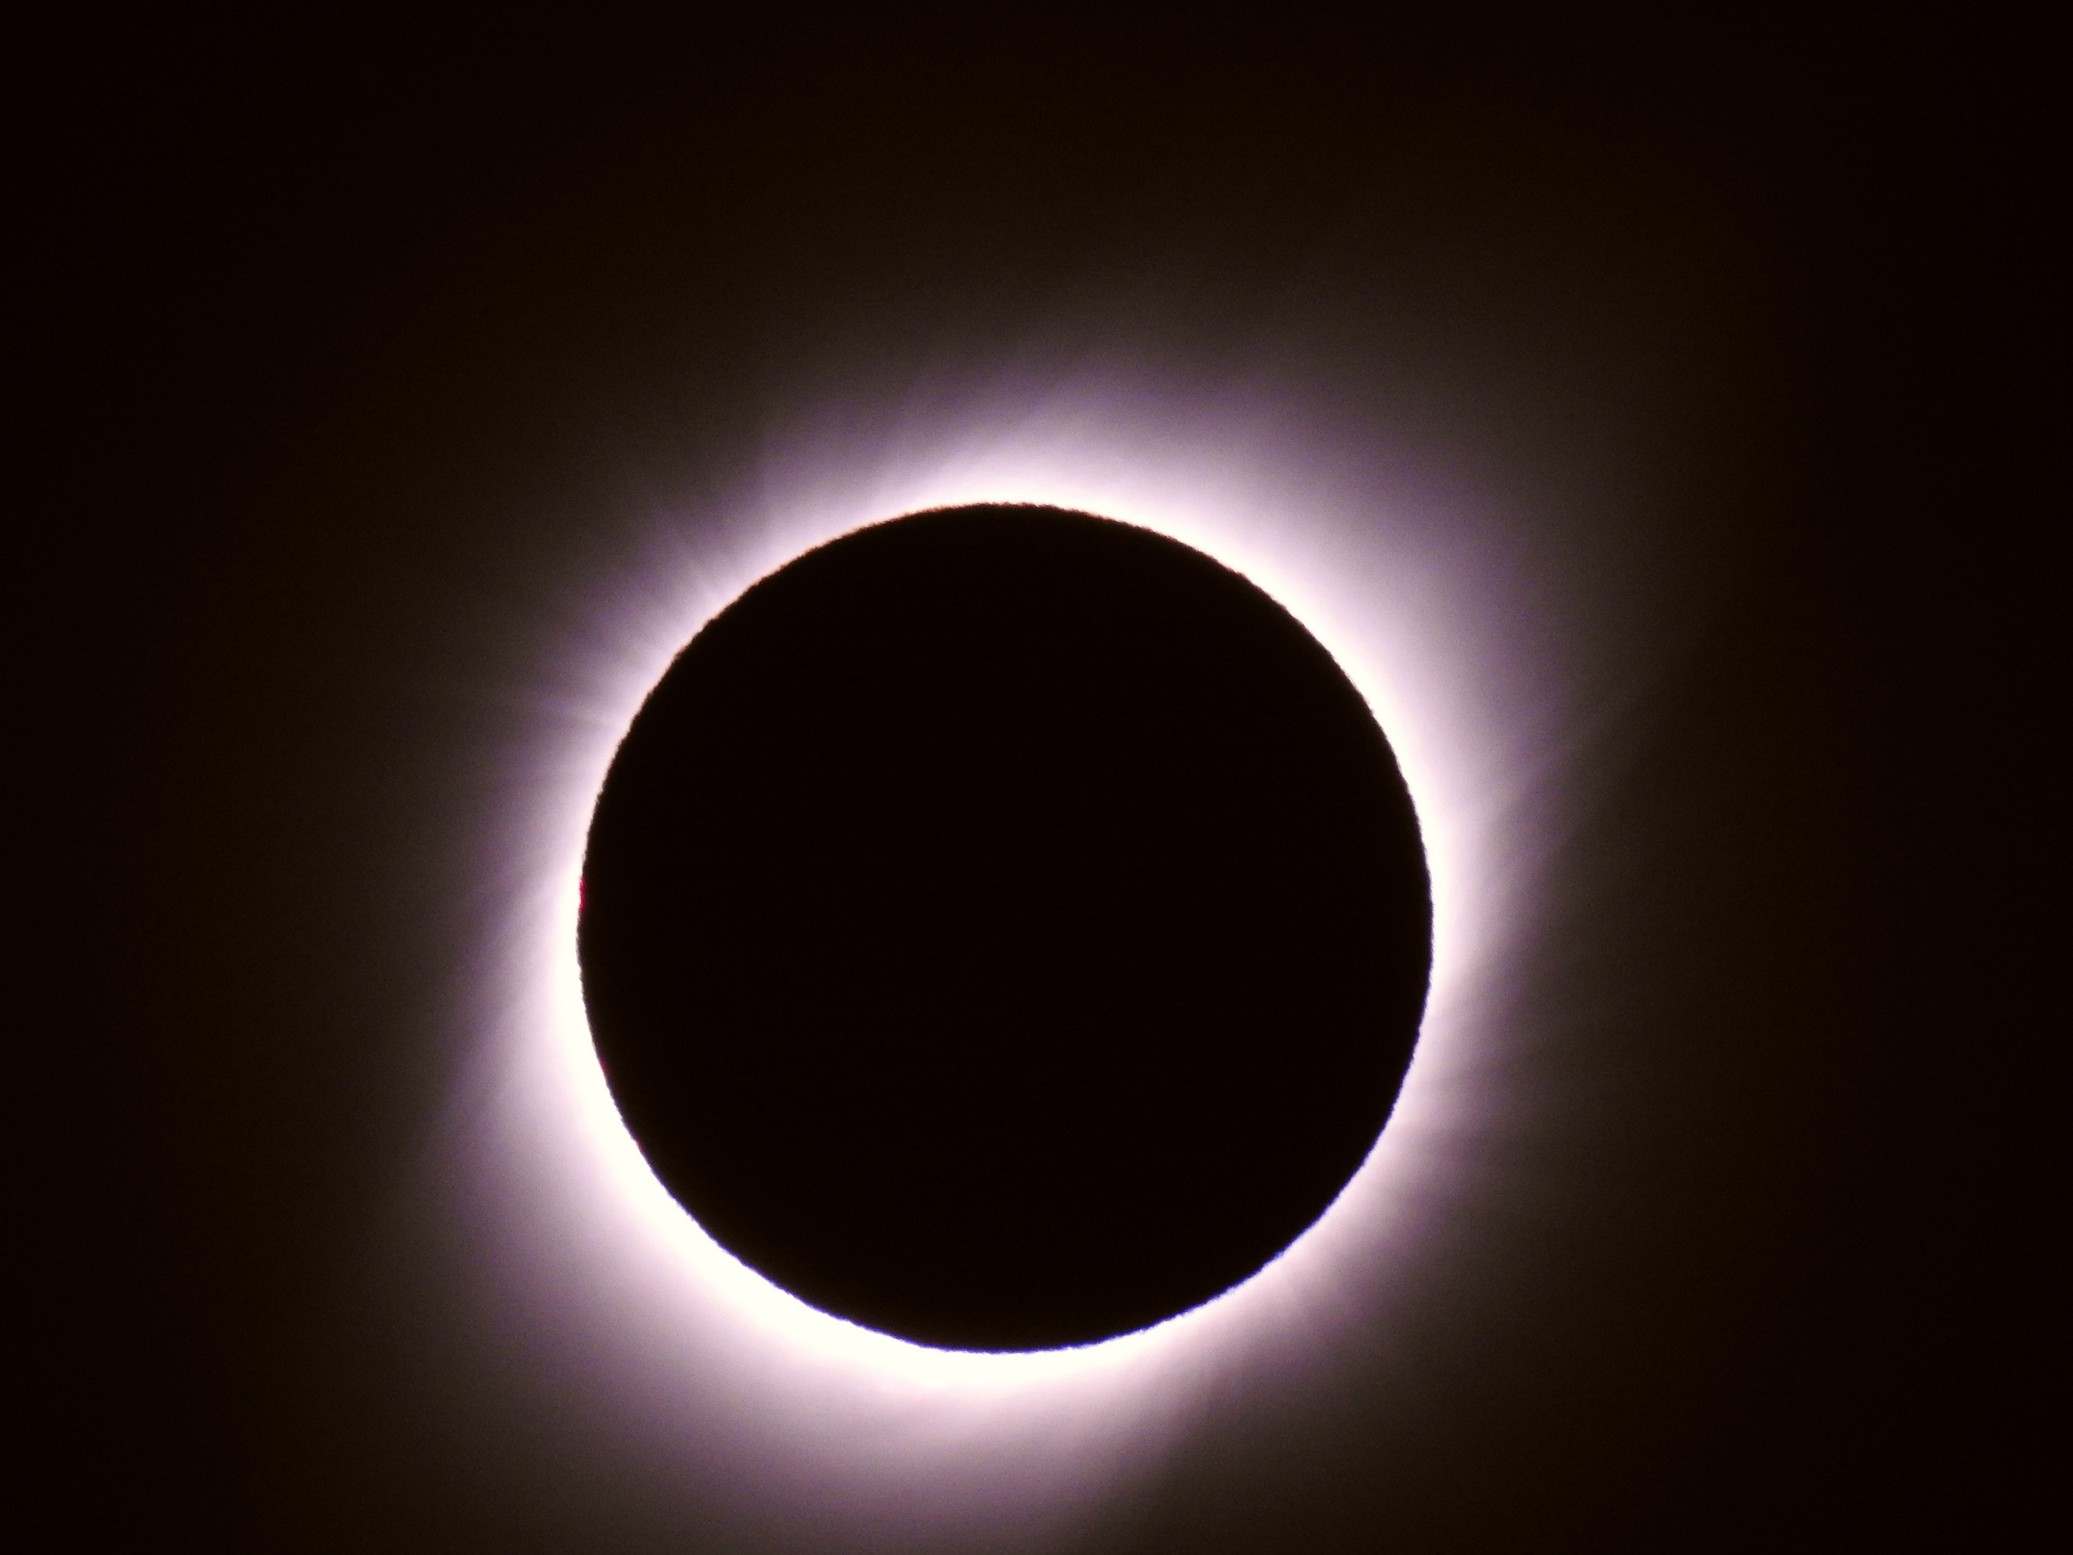 From Córdoba to the Eclipse, ARG